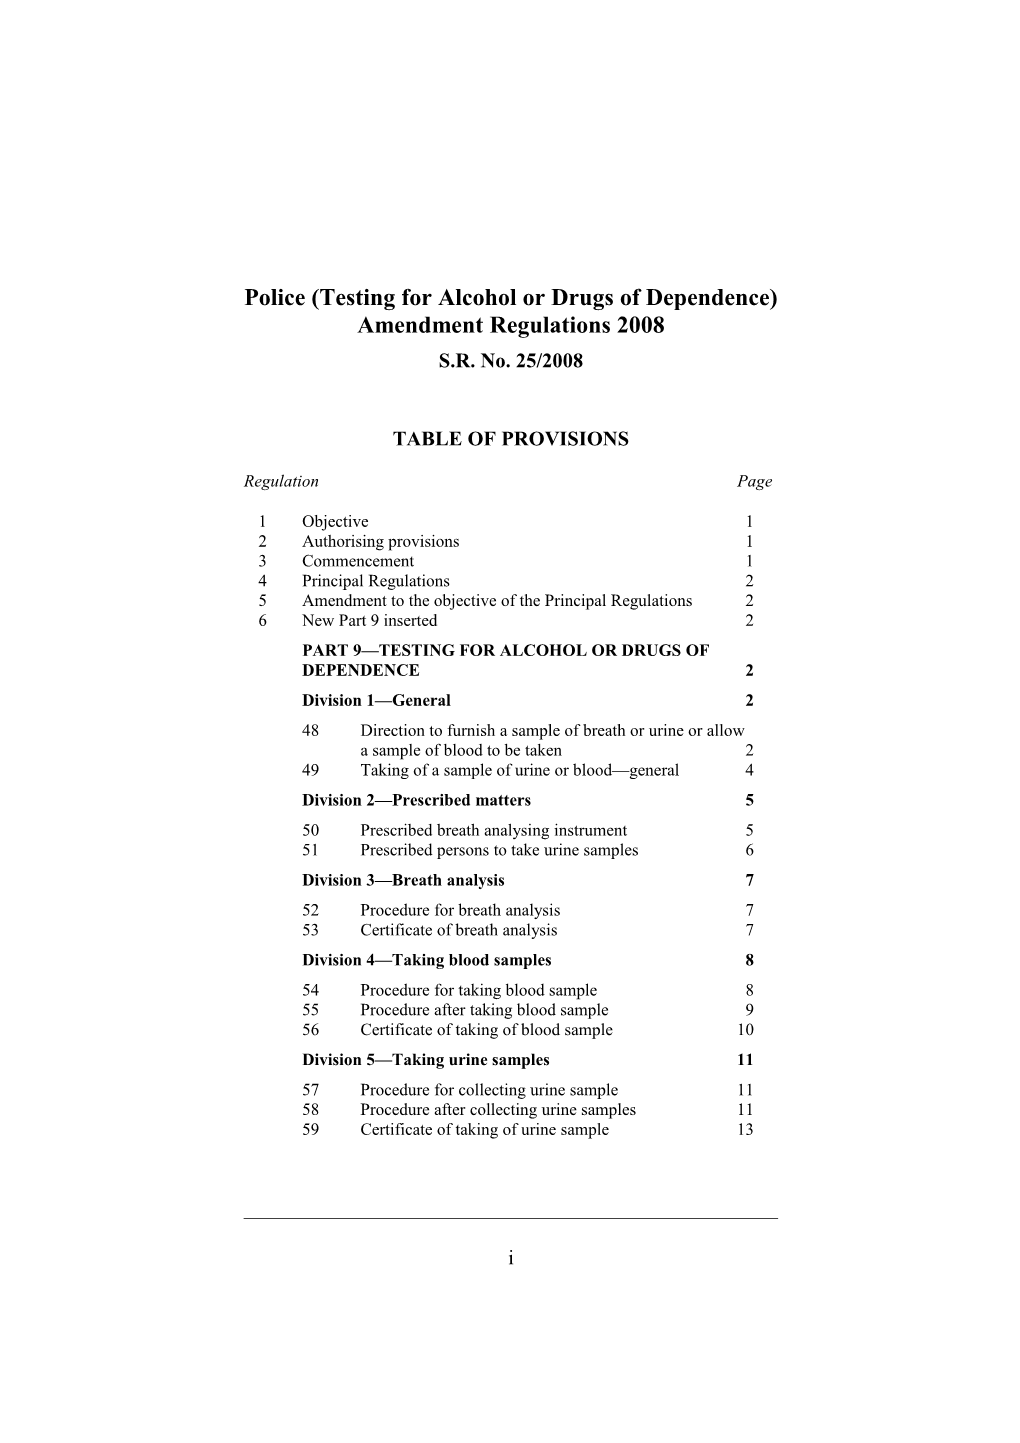 Police (Testing for Alcohol Or Drugs of Dependence) Amendment Regulations 2008